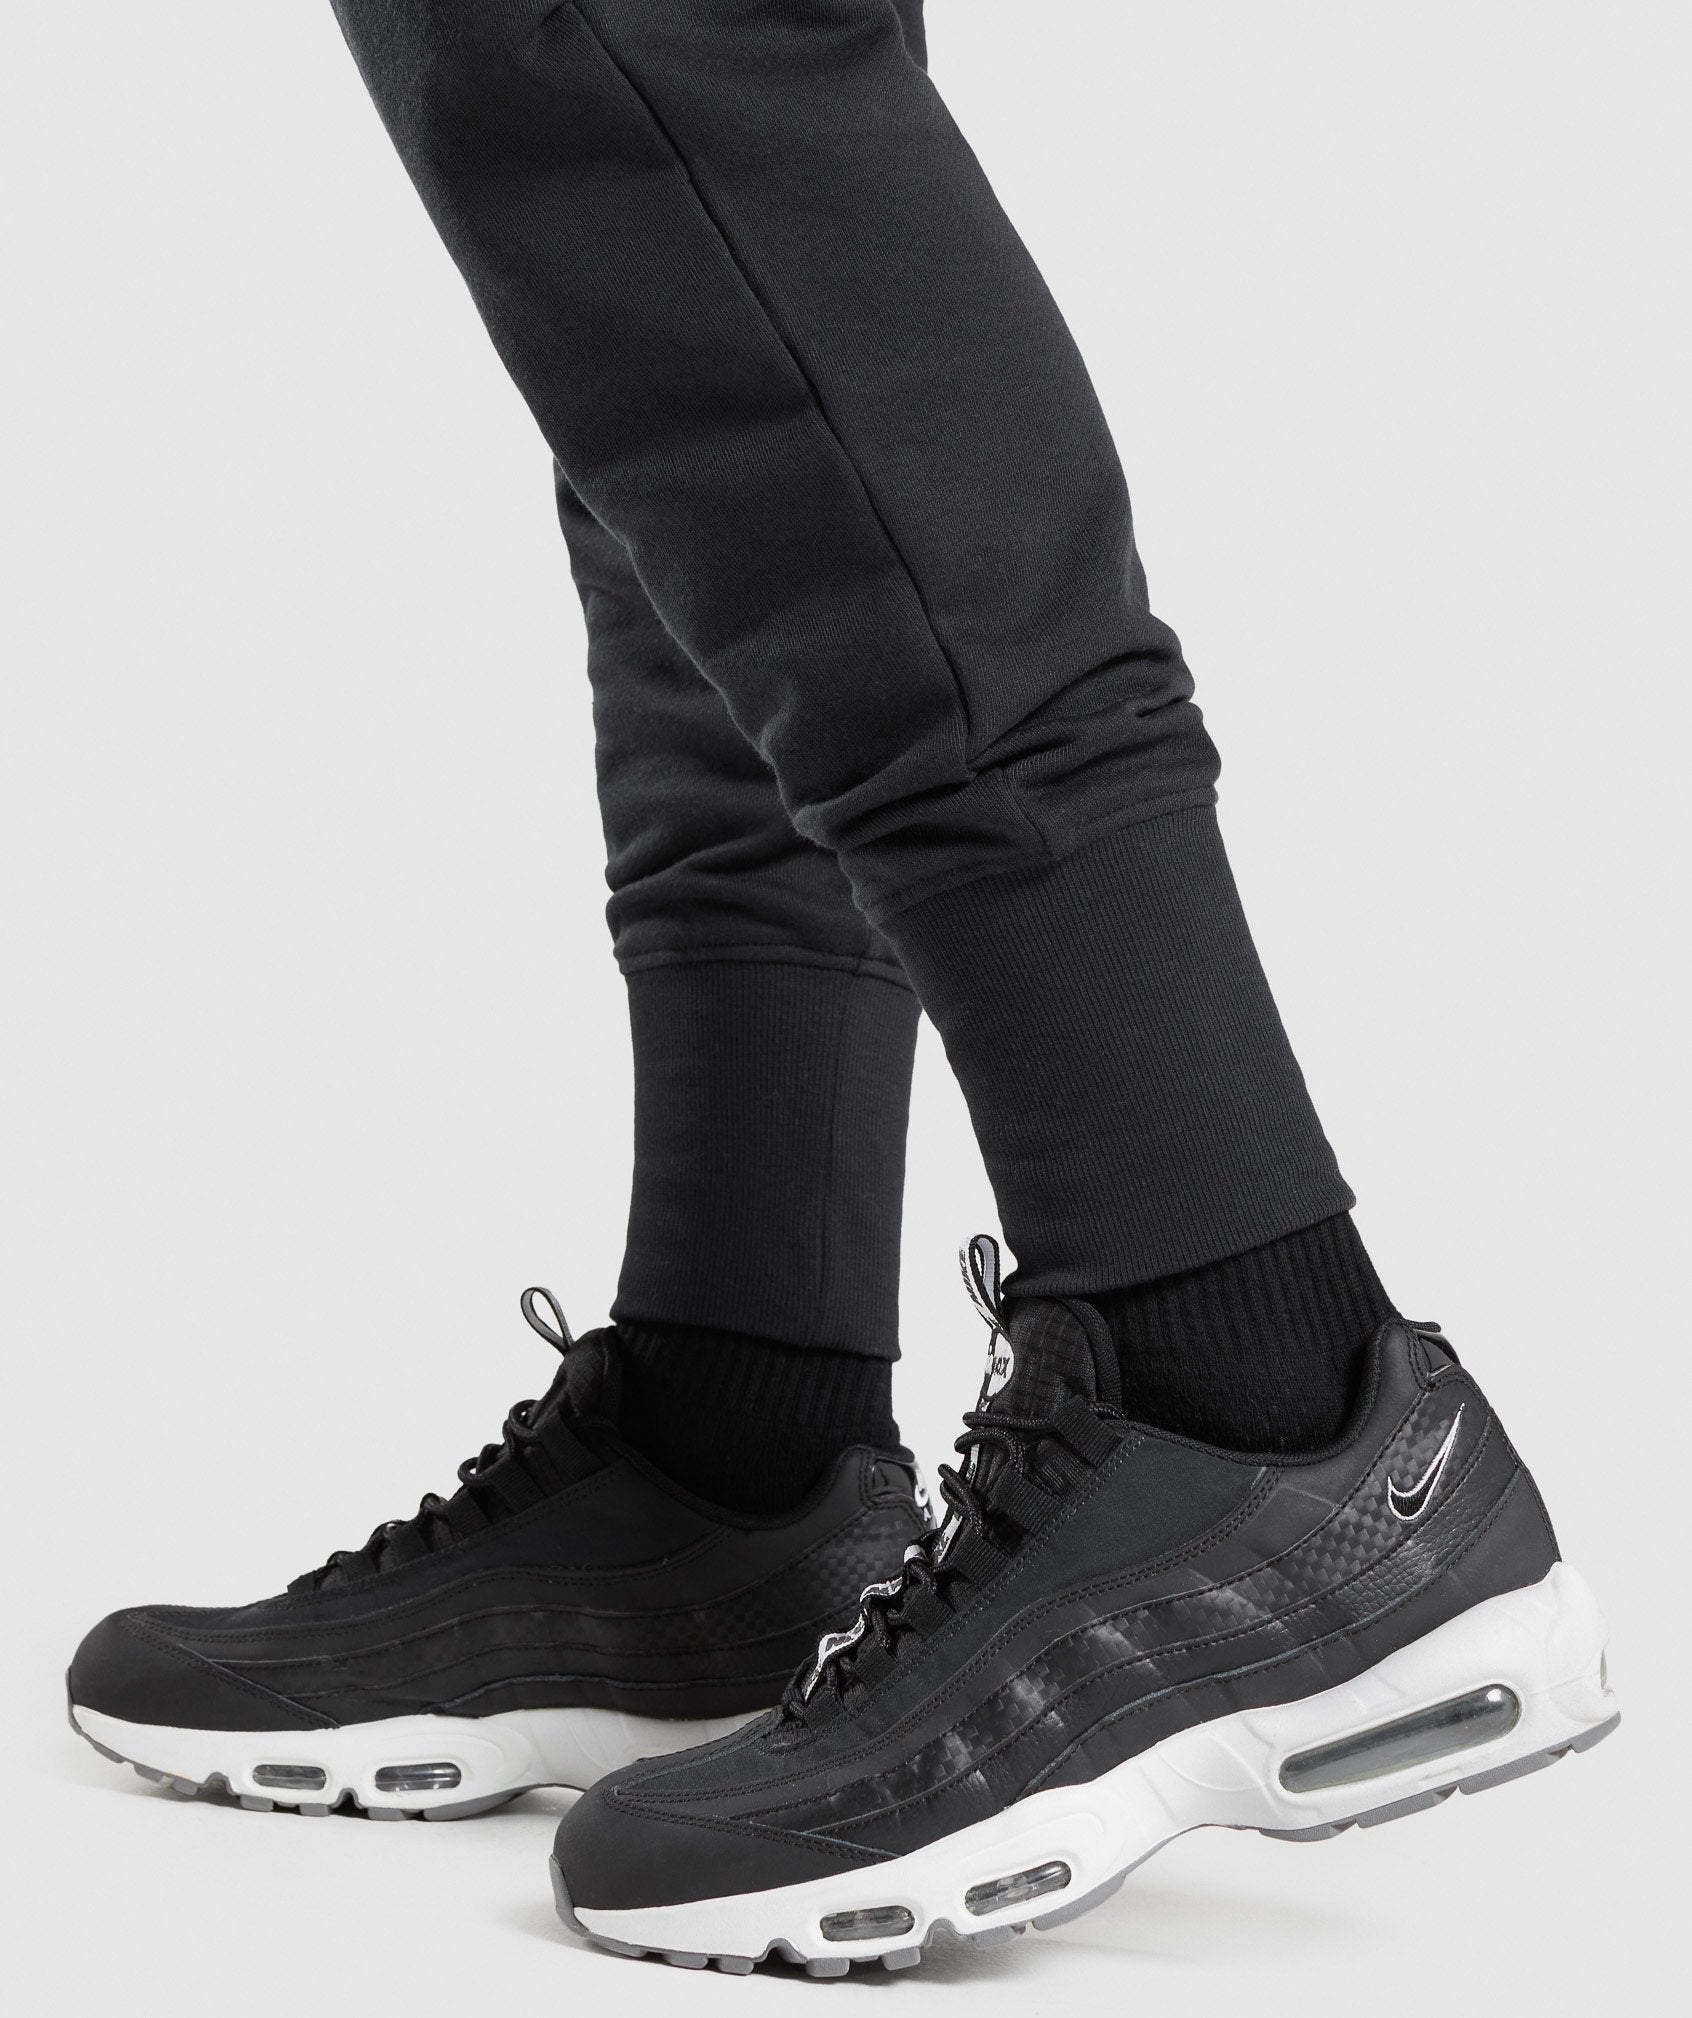 Restore Joggers in Black - view 7